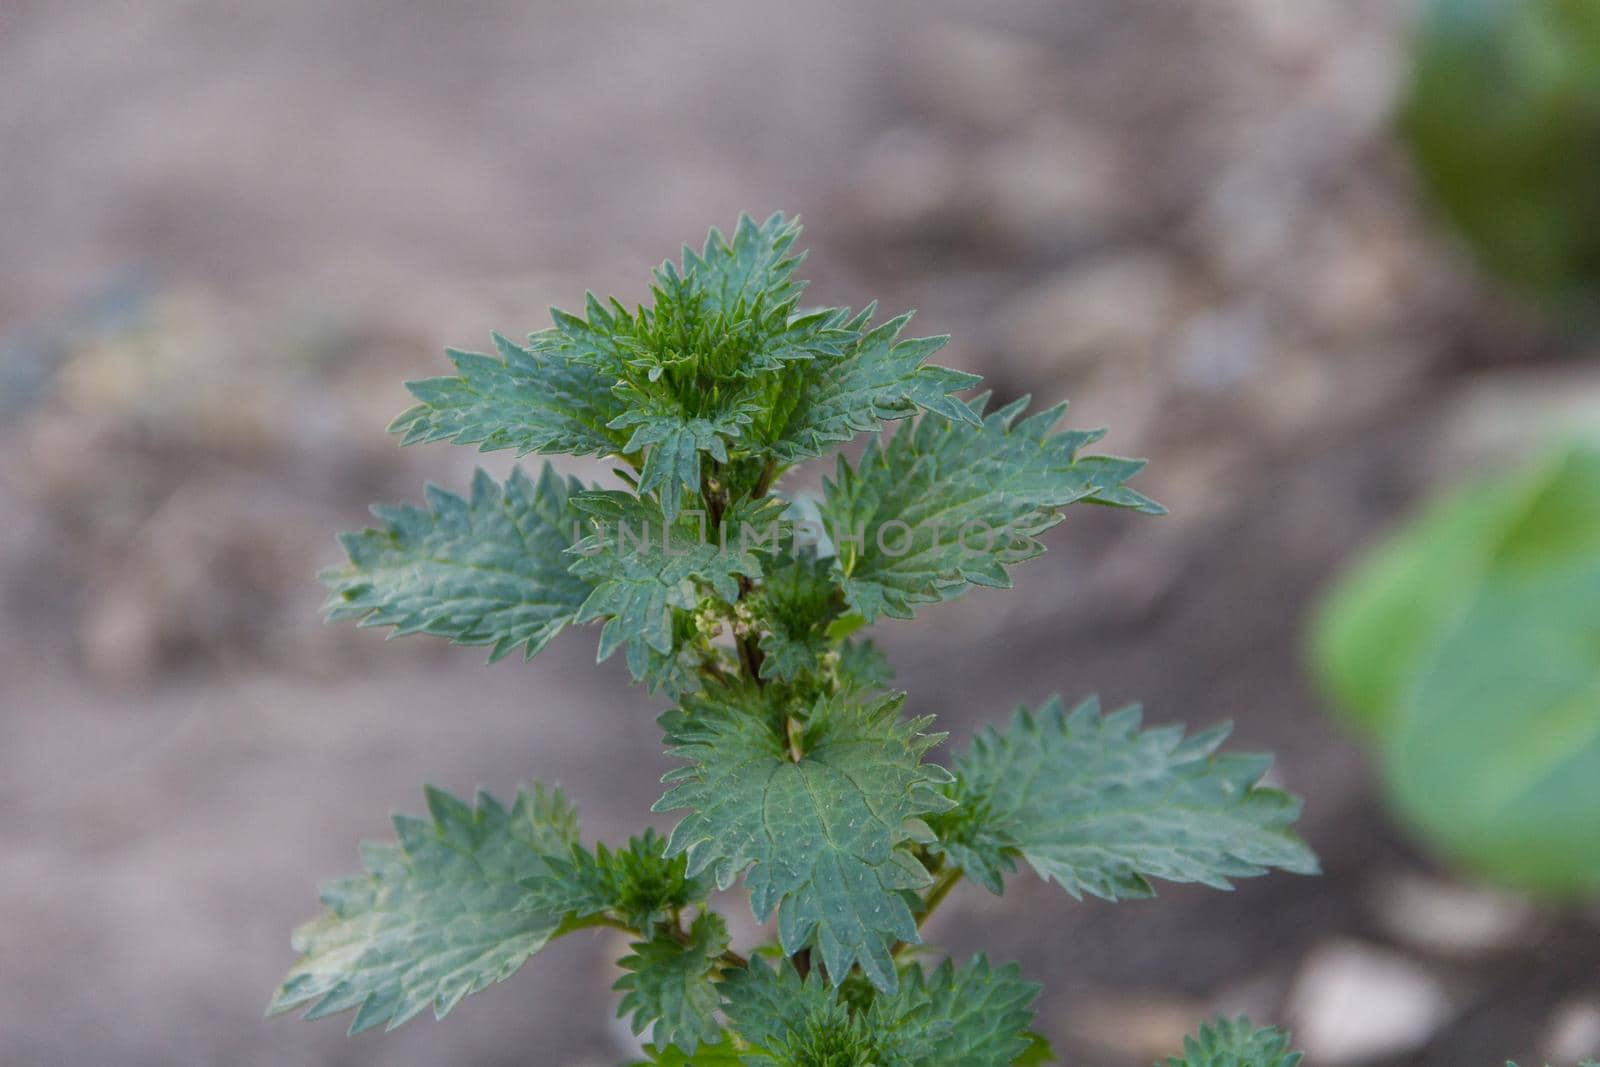 wild nettle plant grown in the garden for its properties